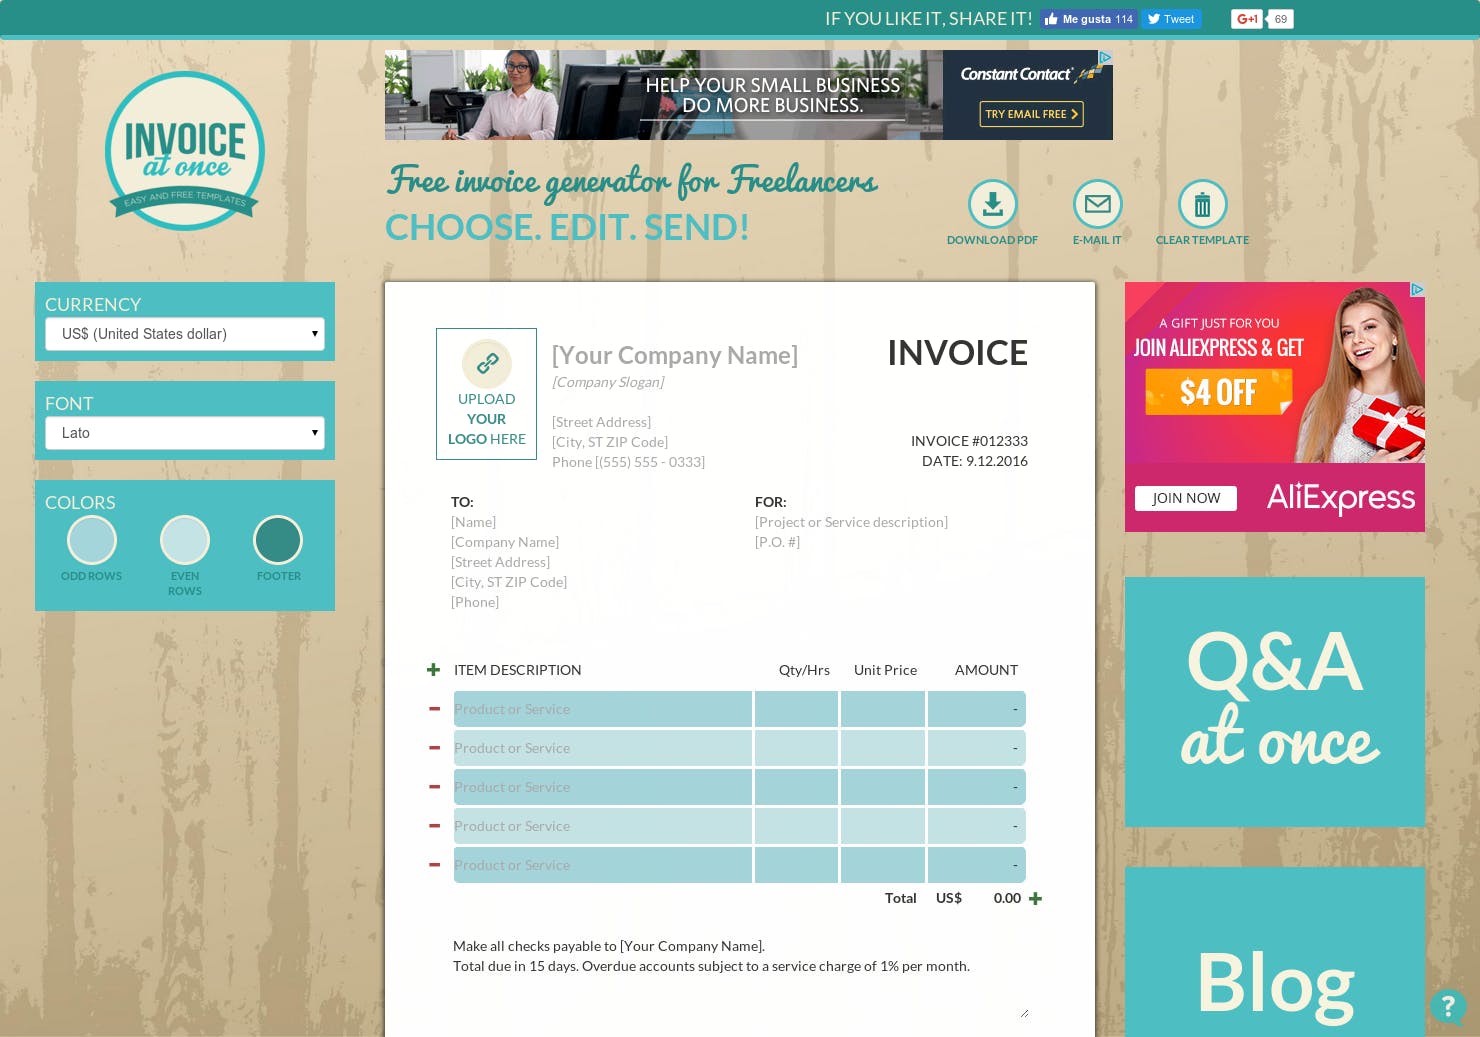 Invoice At Once media 1